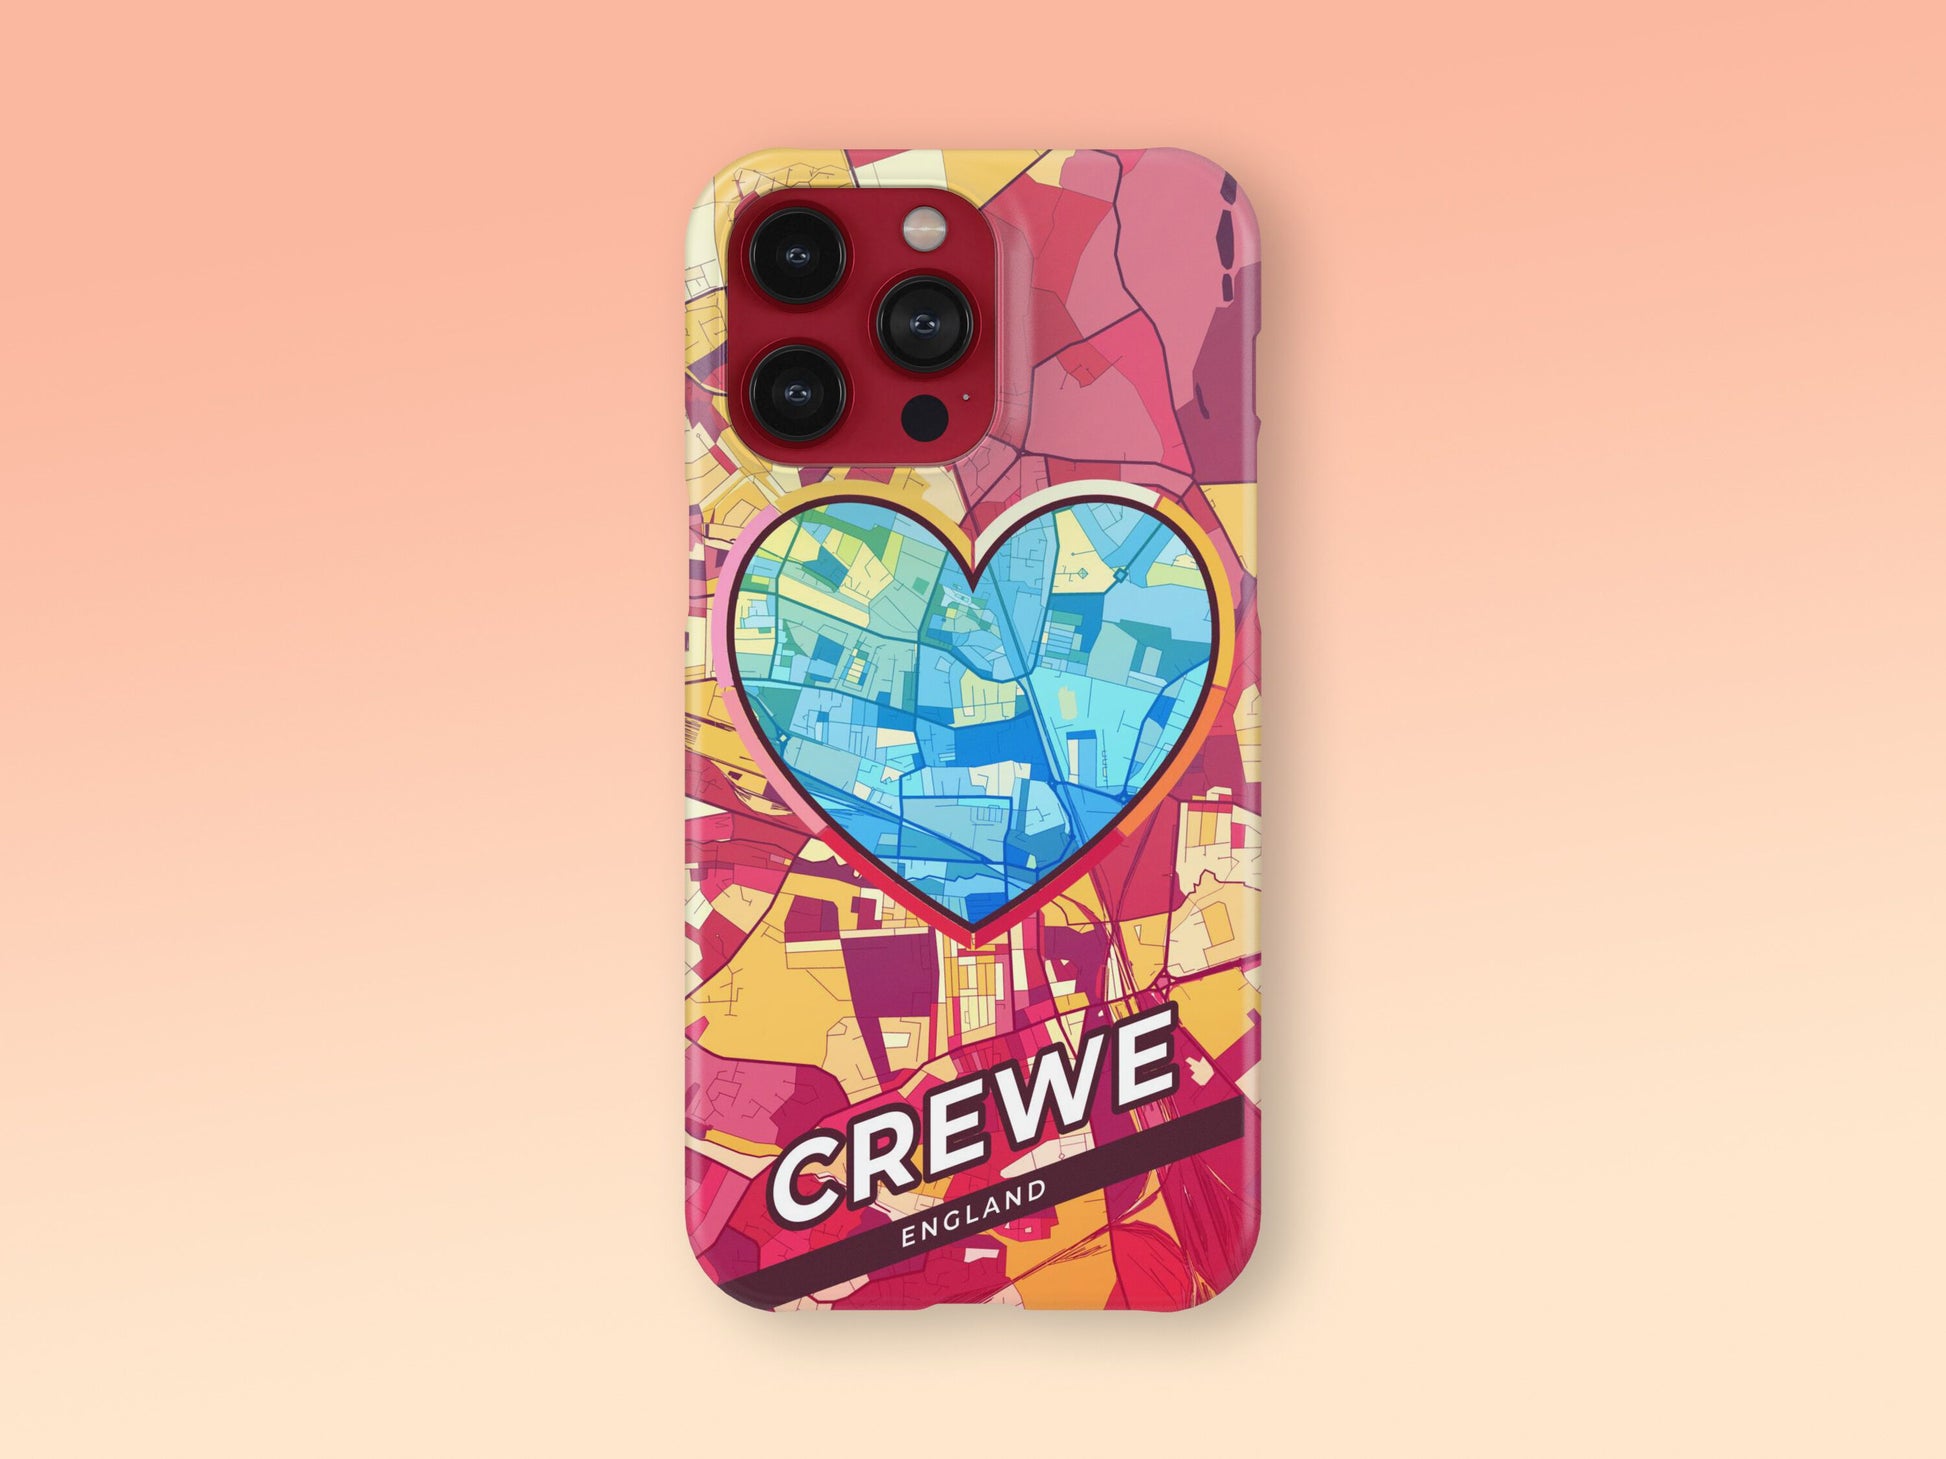 Crewe England slim phone case with colorful icon. Birthday, wedding or housewarming gift. Couple match cases. 2